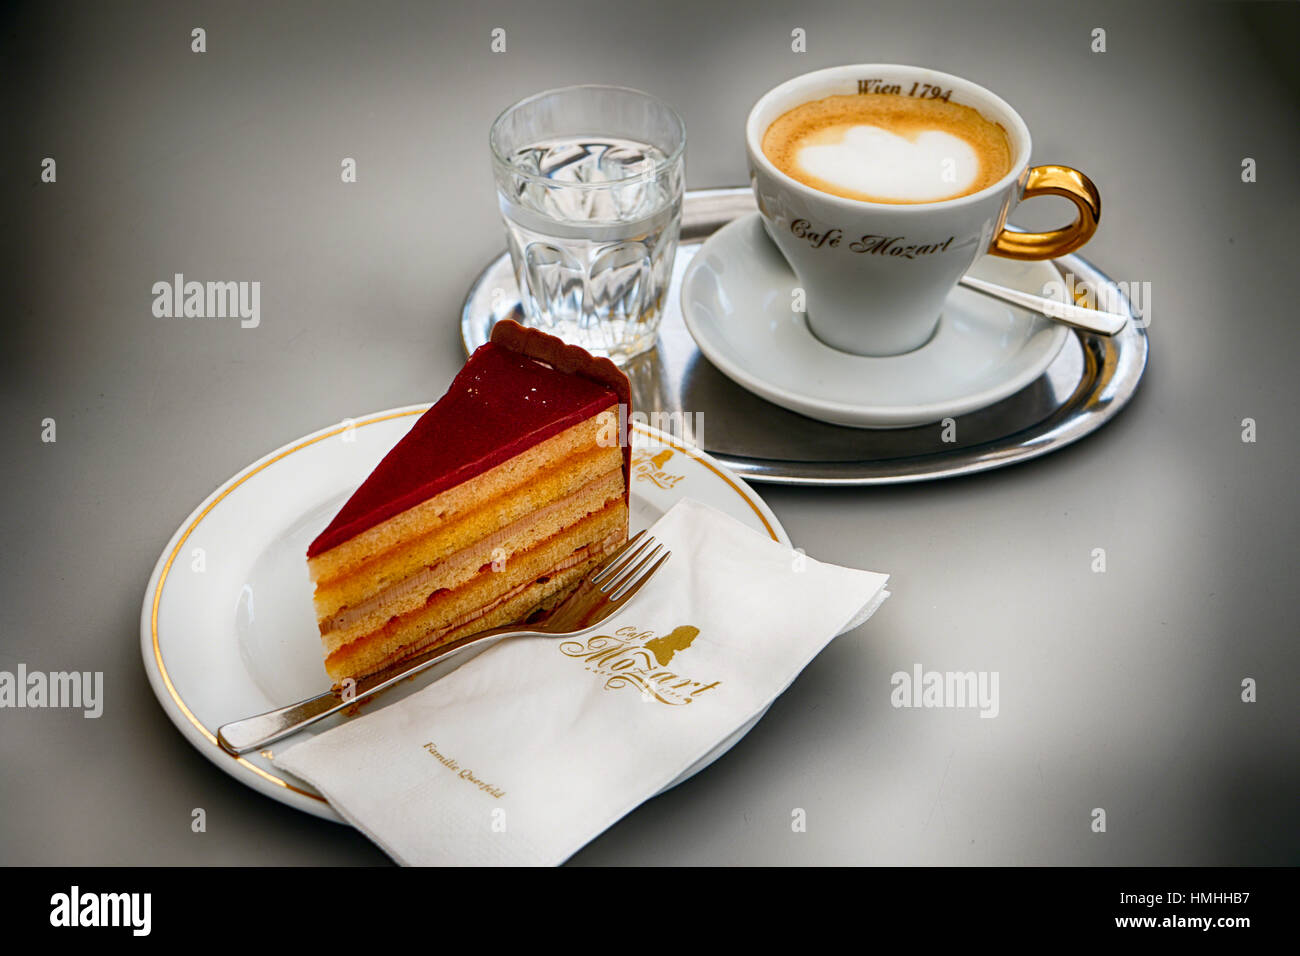 Close Up View of a Landtmann's Fine Torte with an Espresso Coffe and Mineral Water, Cafe Mozart, Vienna, Austria Stock Photo